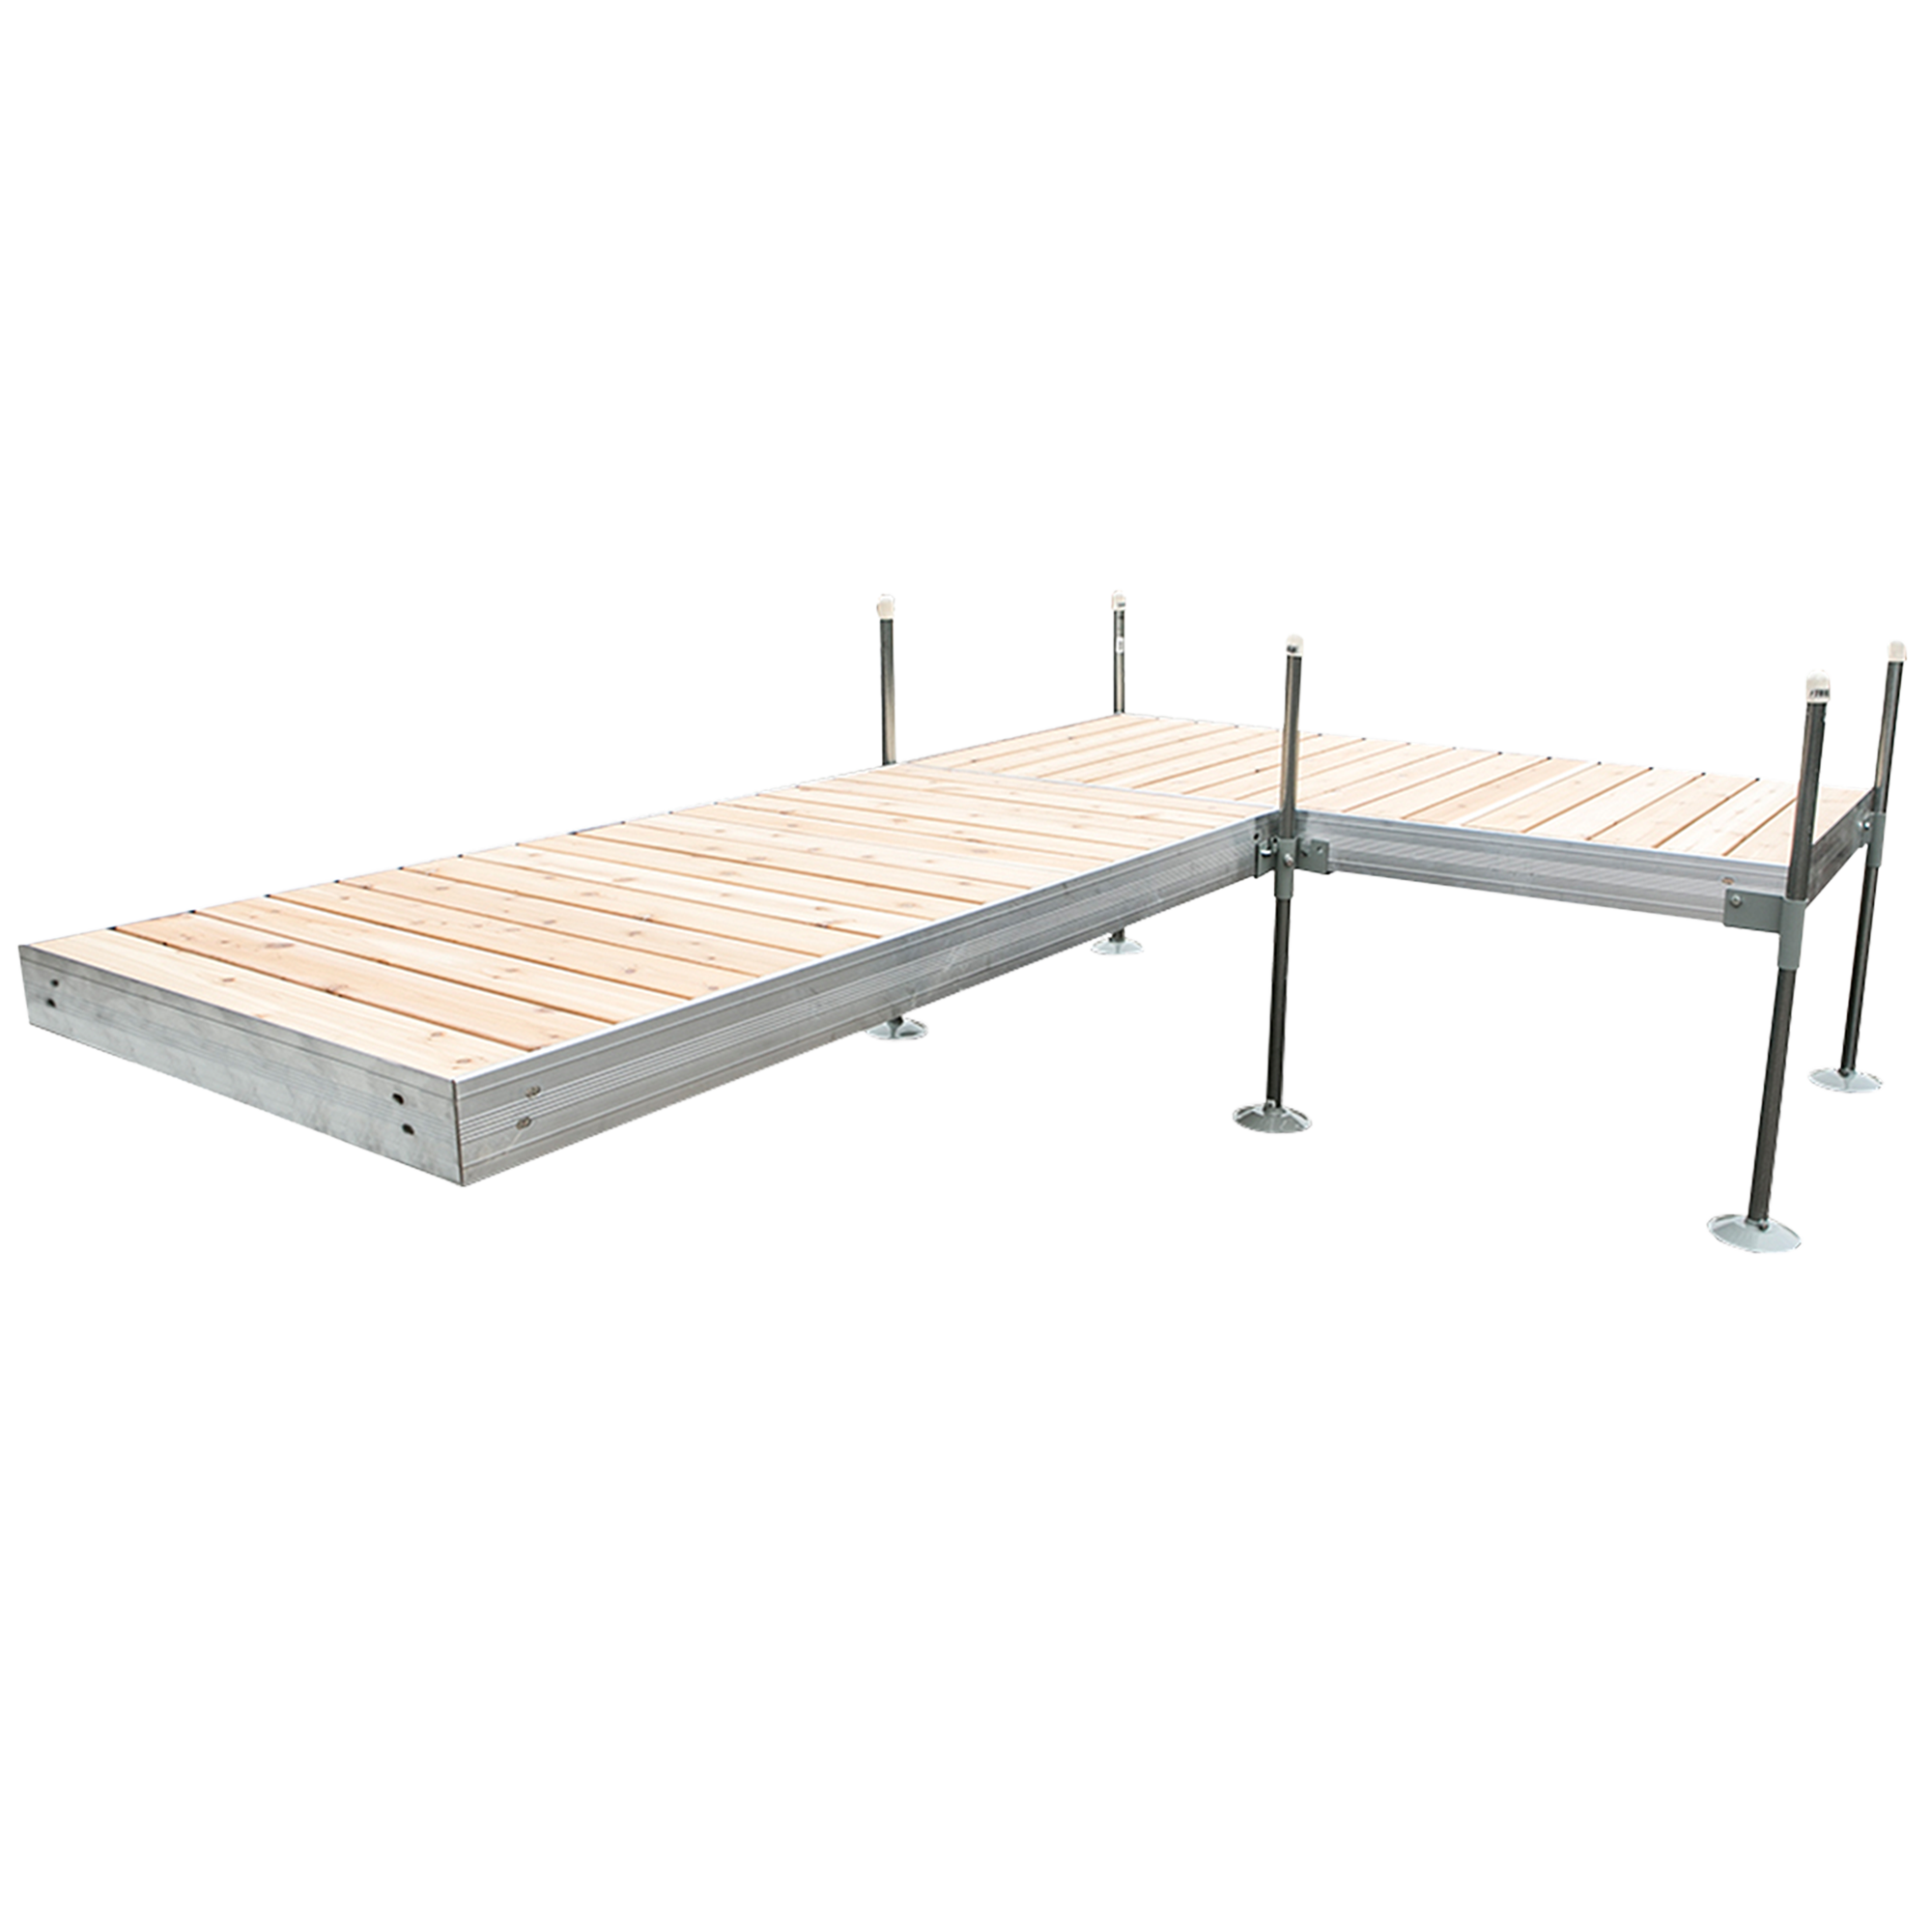 12' L-Shaped Boat Dock System with Aluminum Frame and Cedar Decking